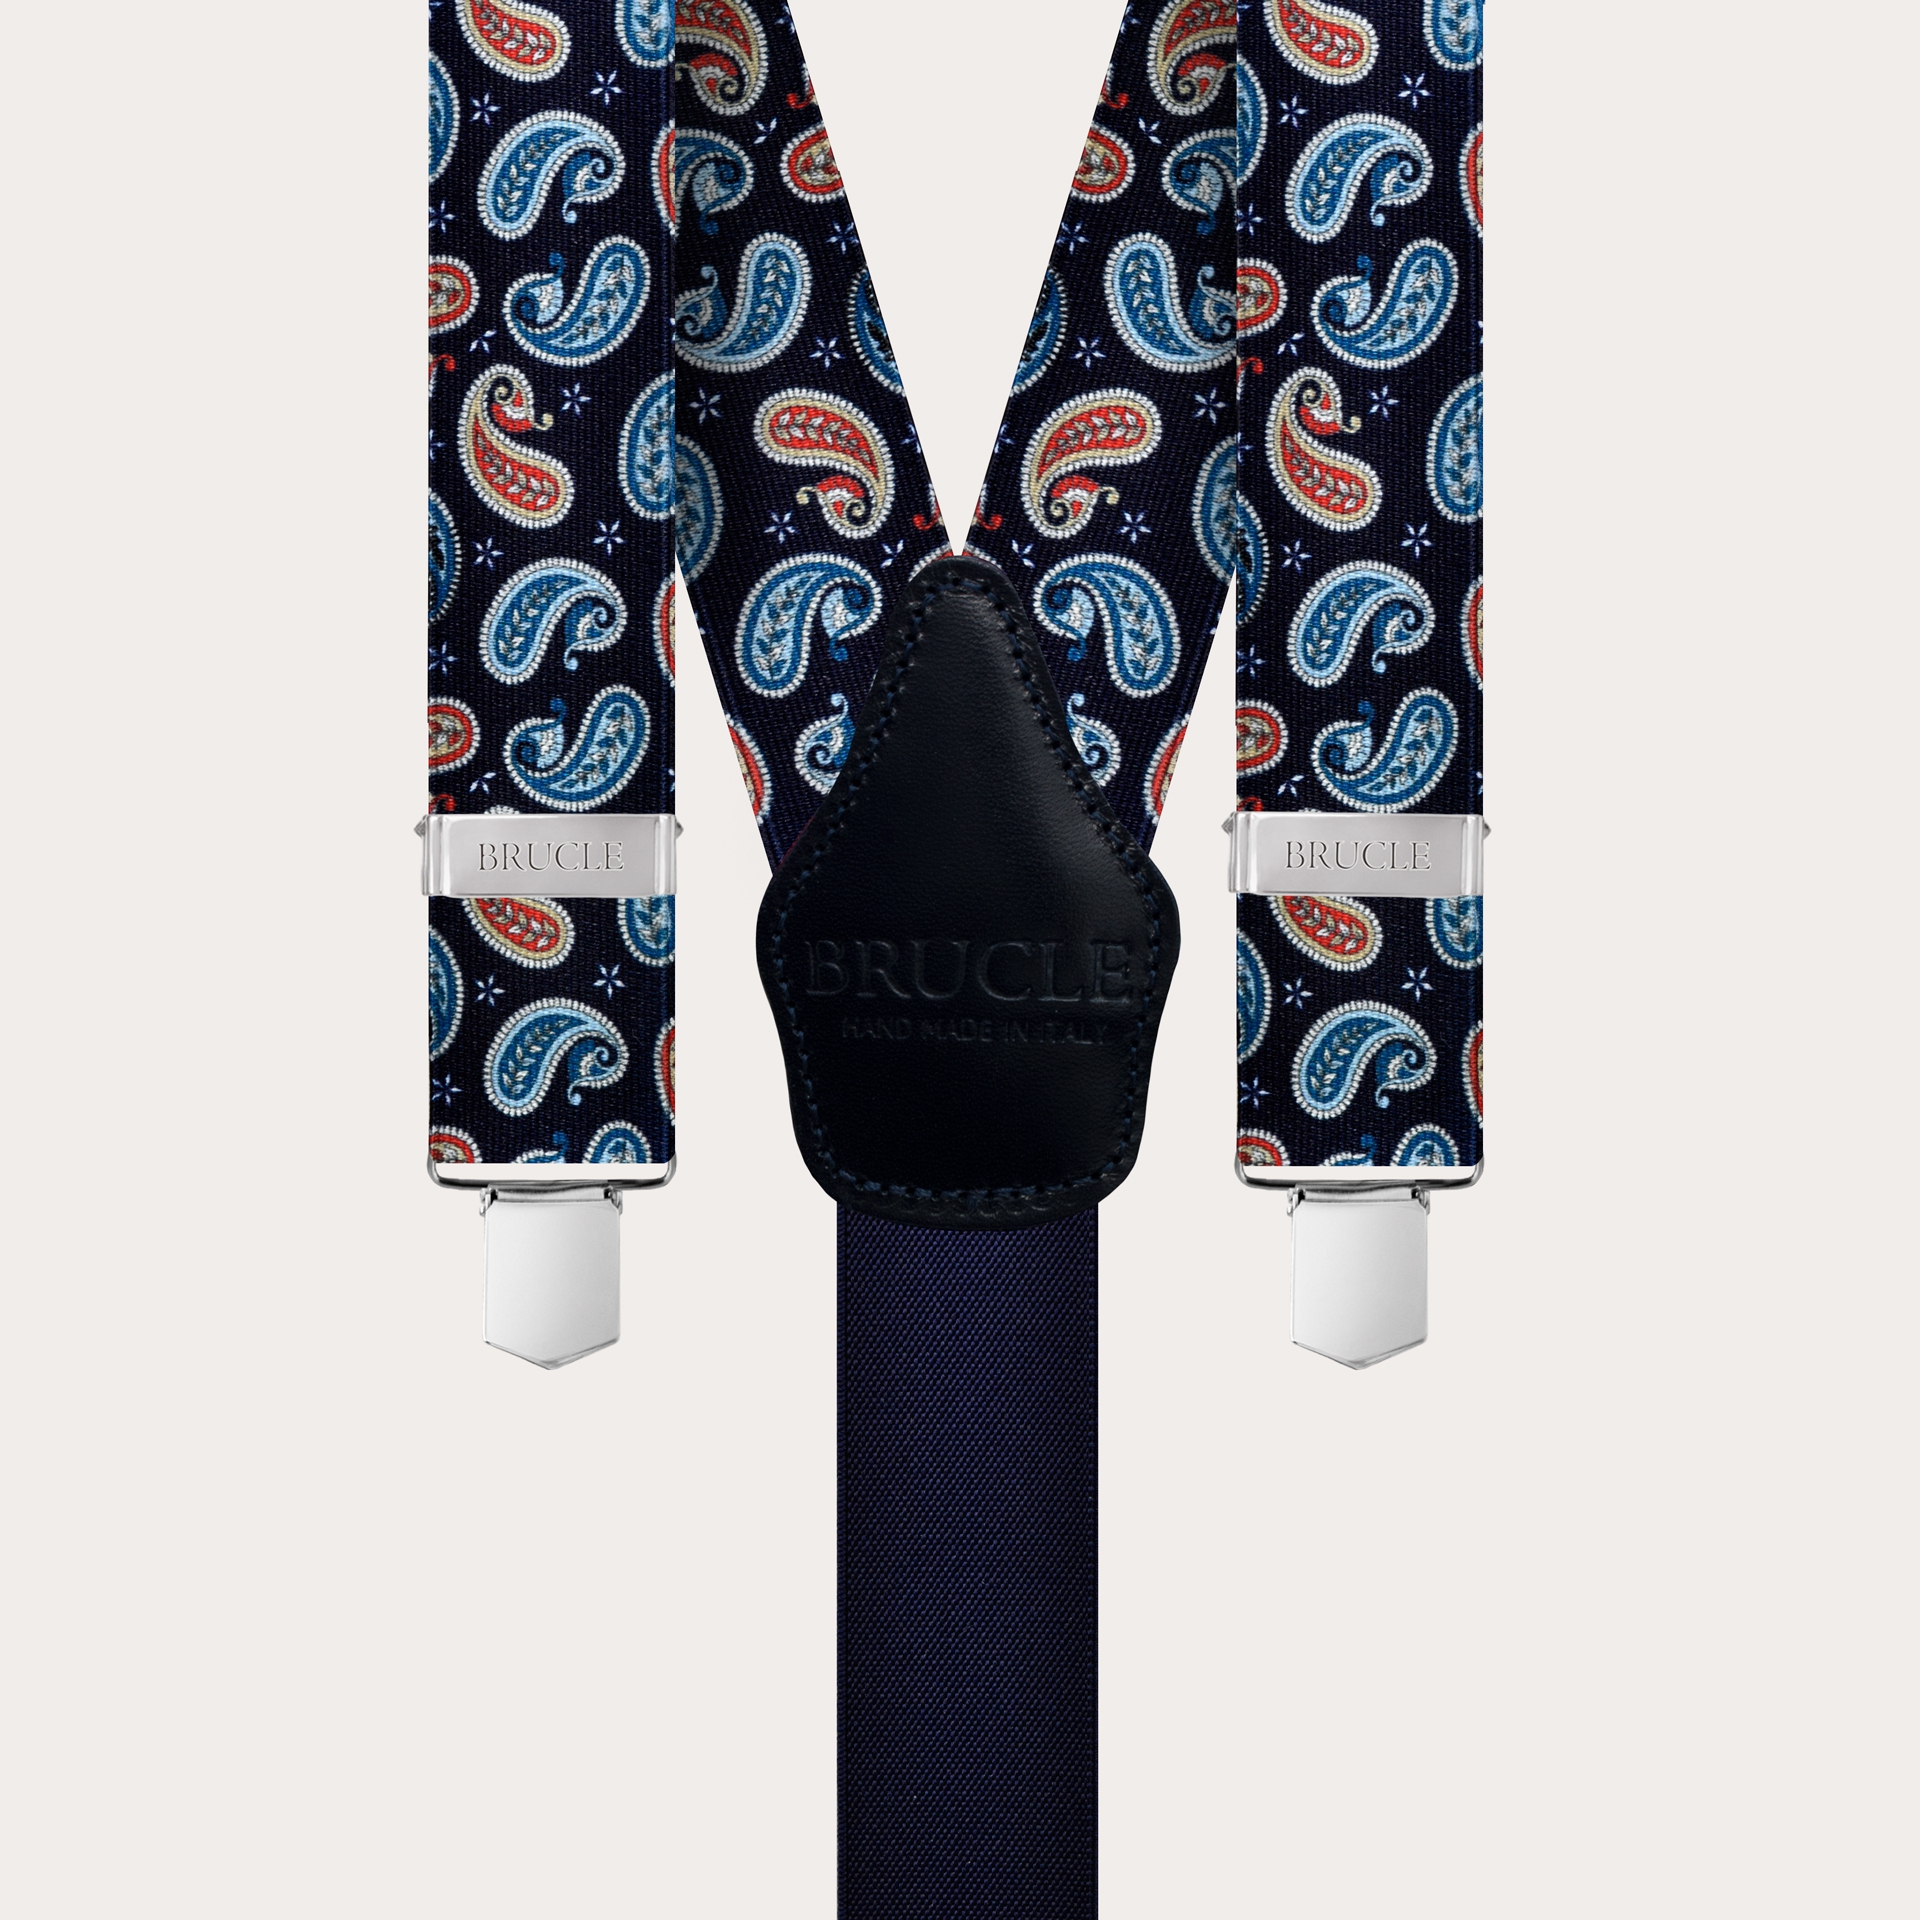 BRUCLE Y-shape suspenders with satin effect, navy blue paisley pattern